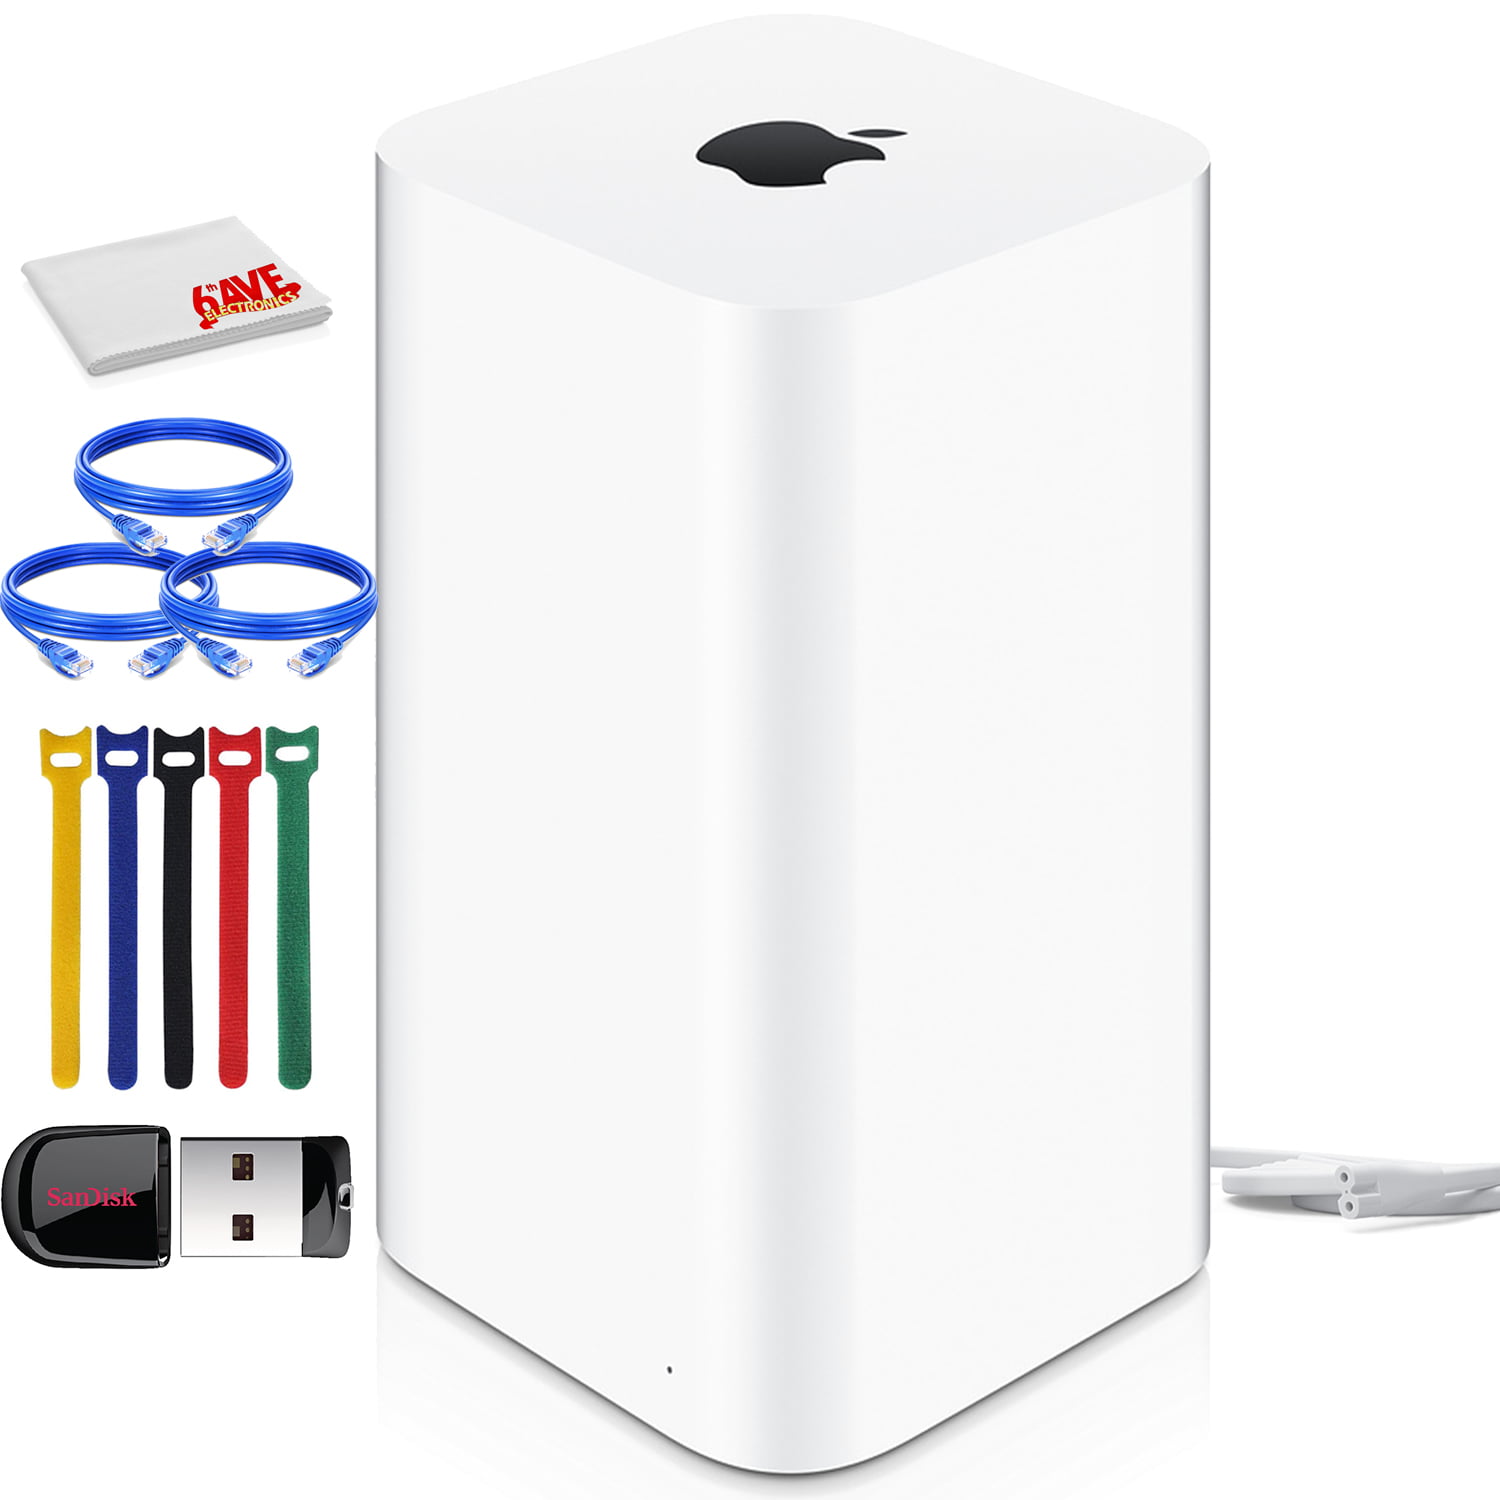 Apple AirPort Time Capsule 2TB Storage (5th Generation) ME177LL/A